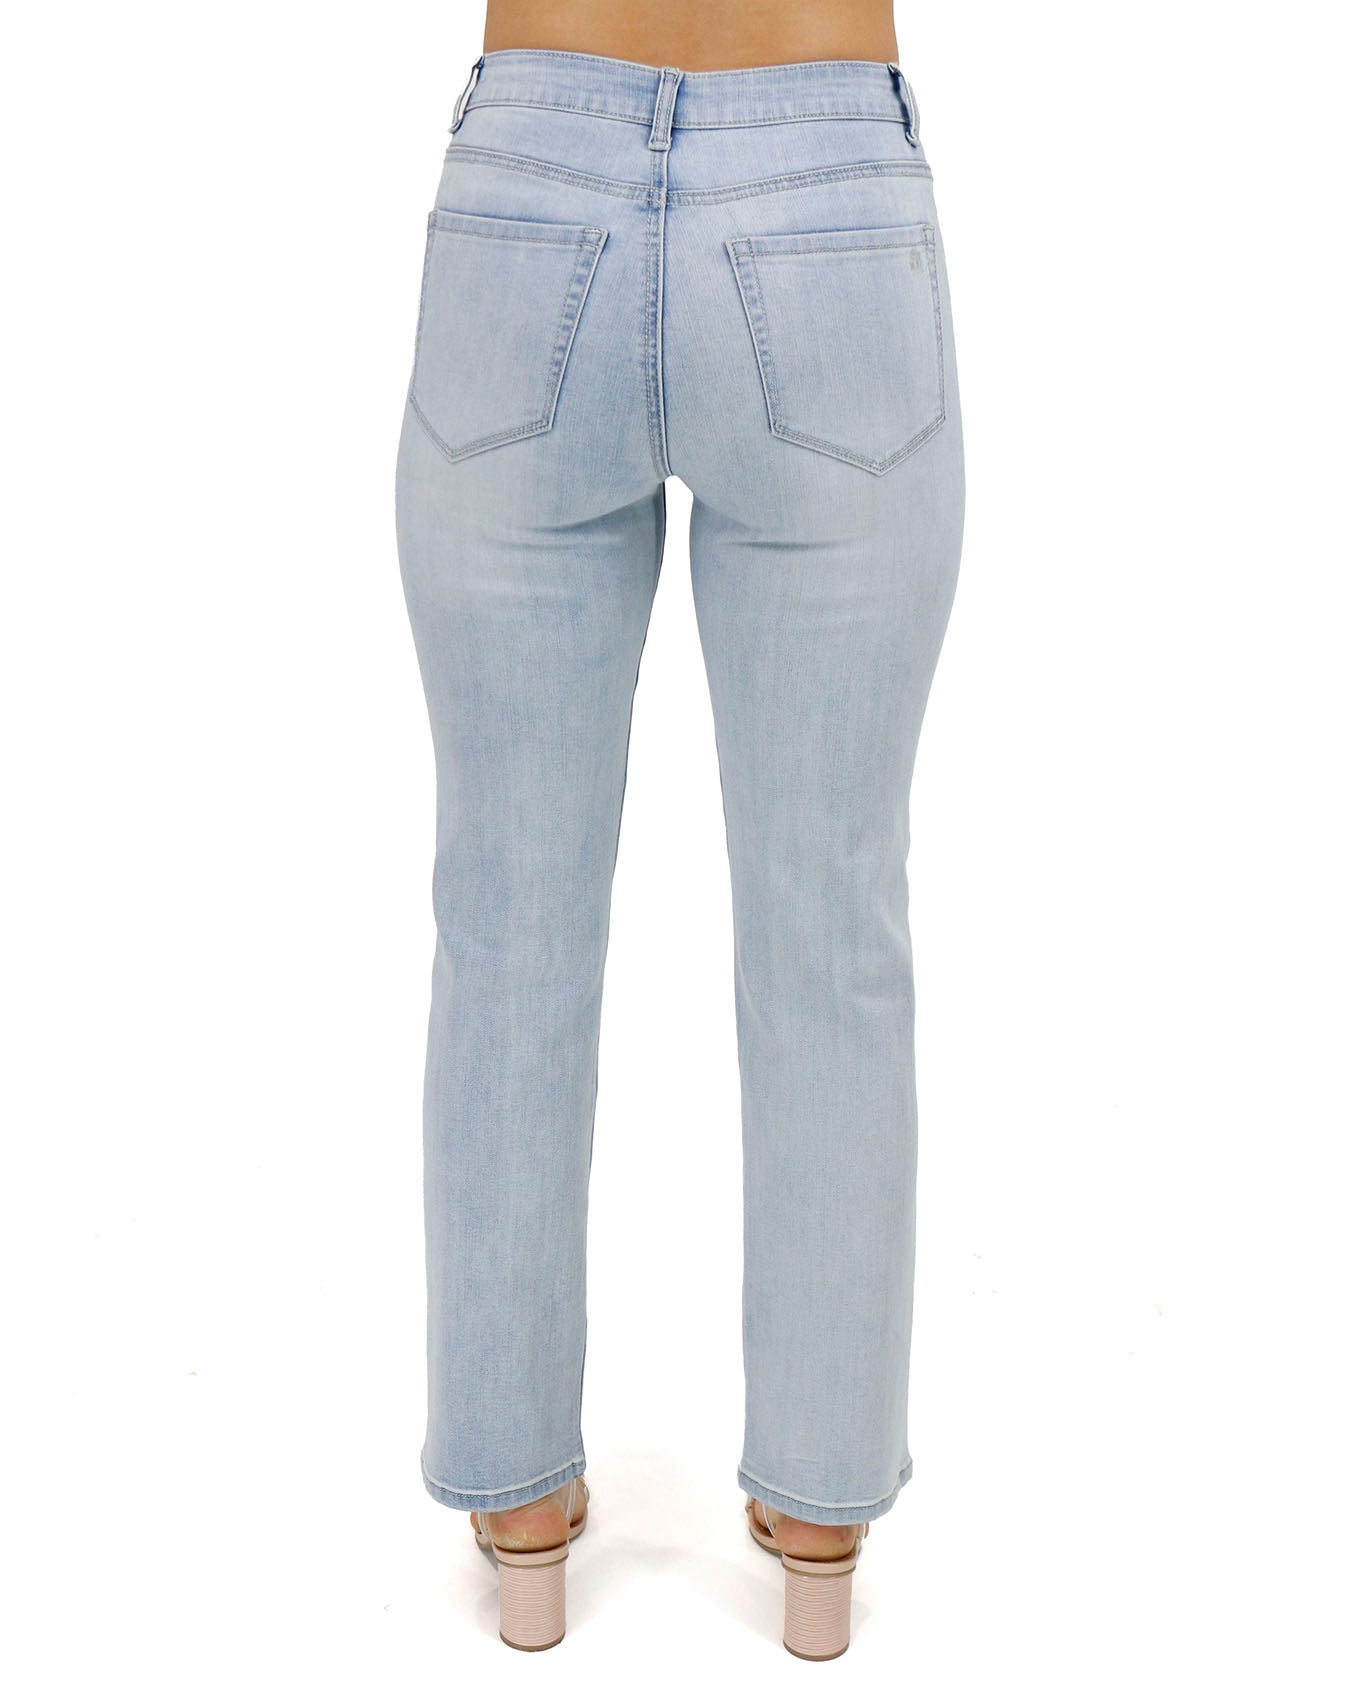 Mel's Fave Non Distressed Light Mid-Wash Full Length Jeans